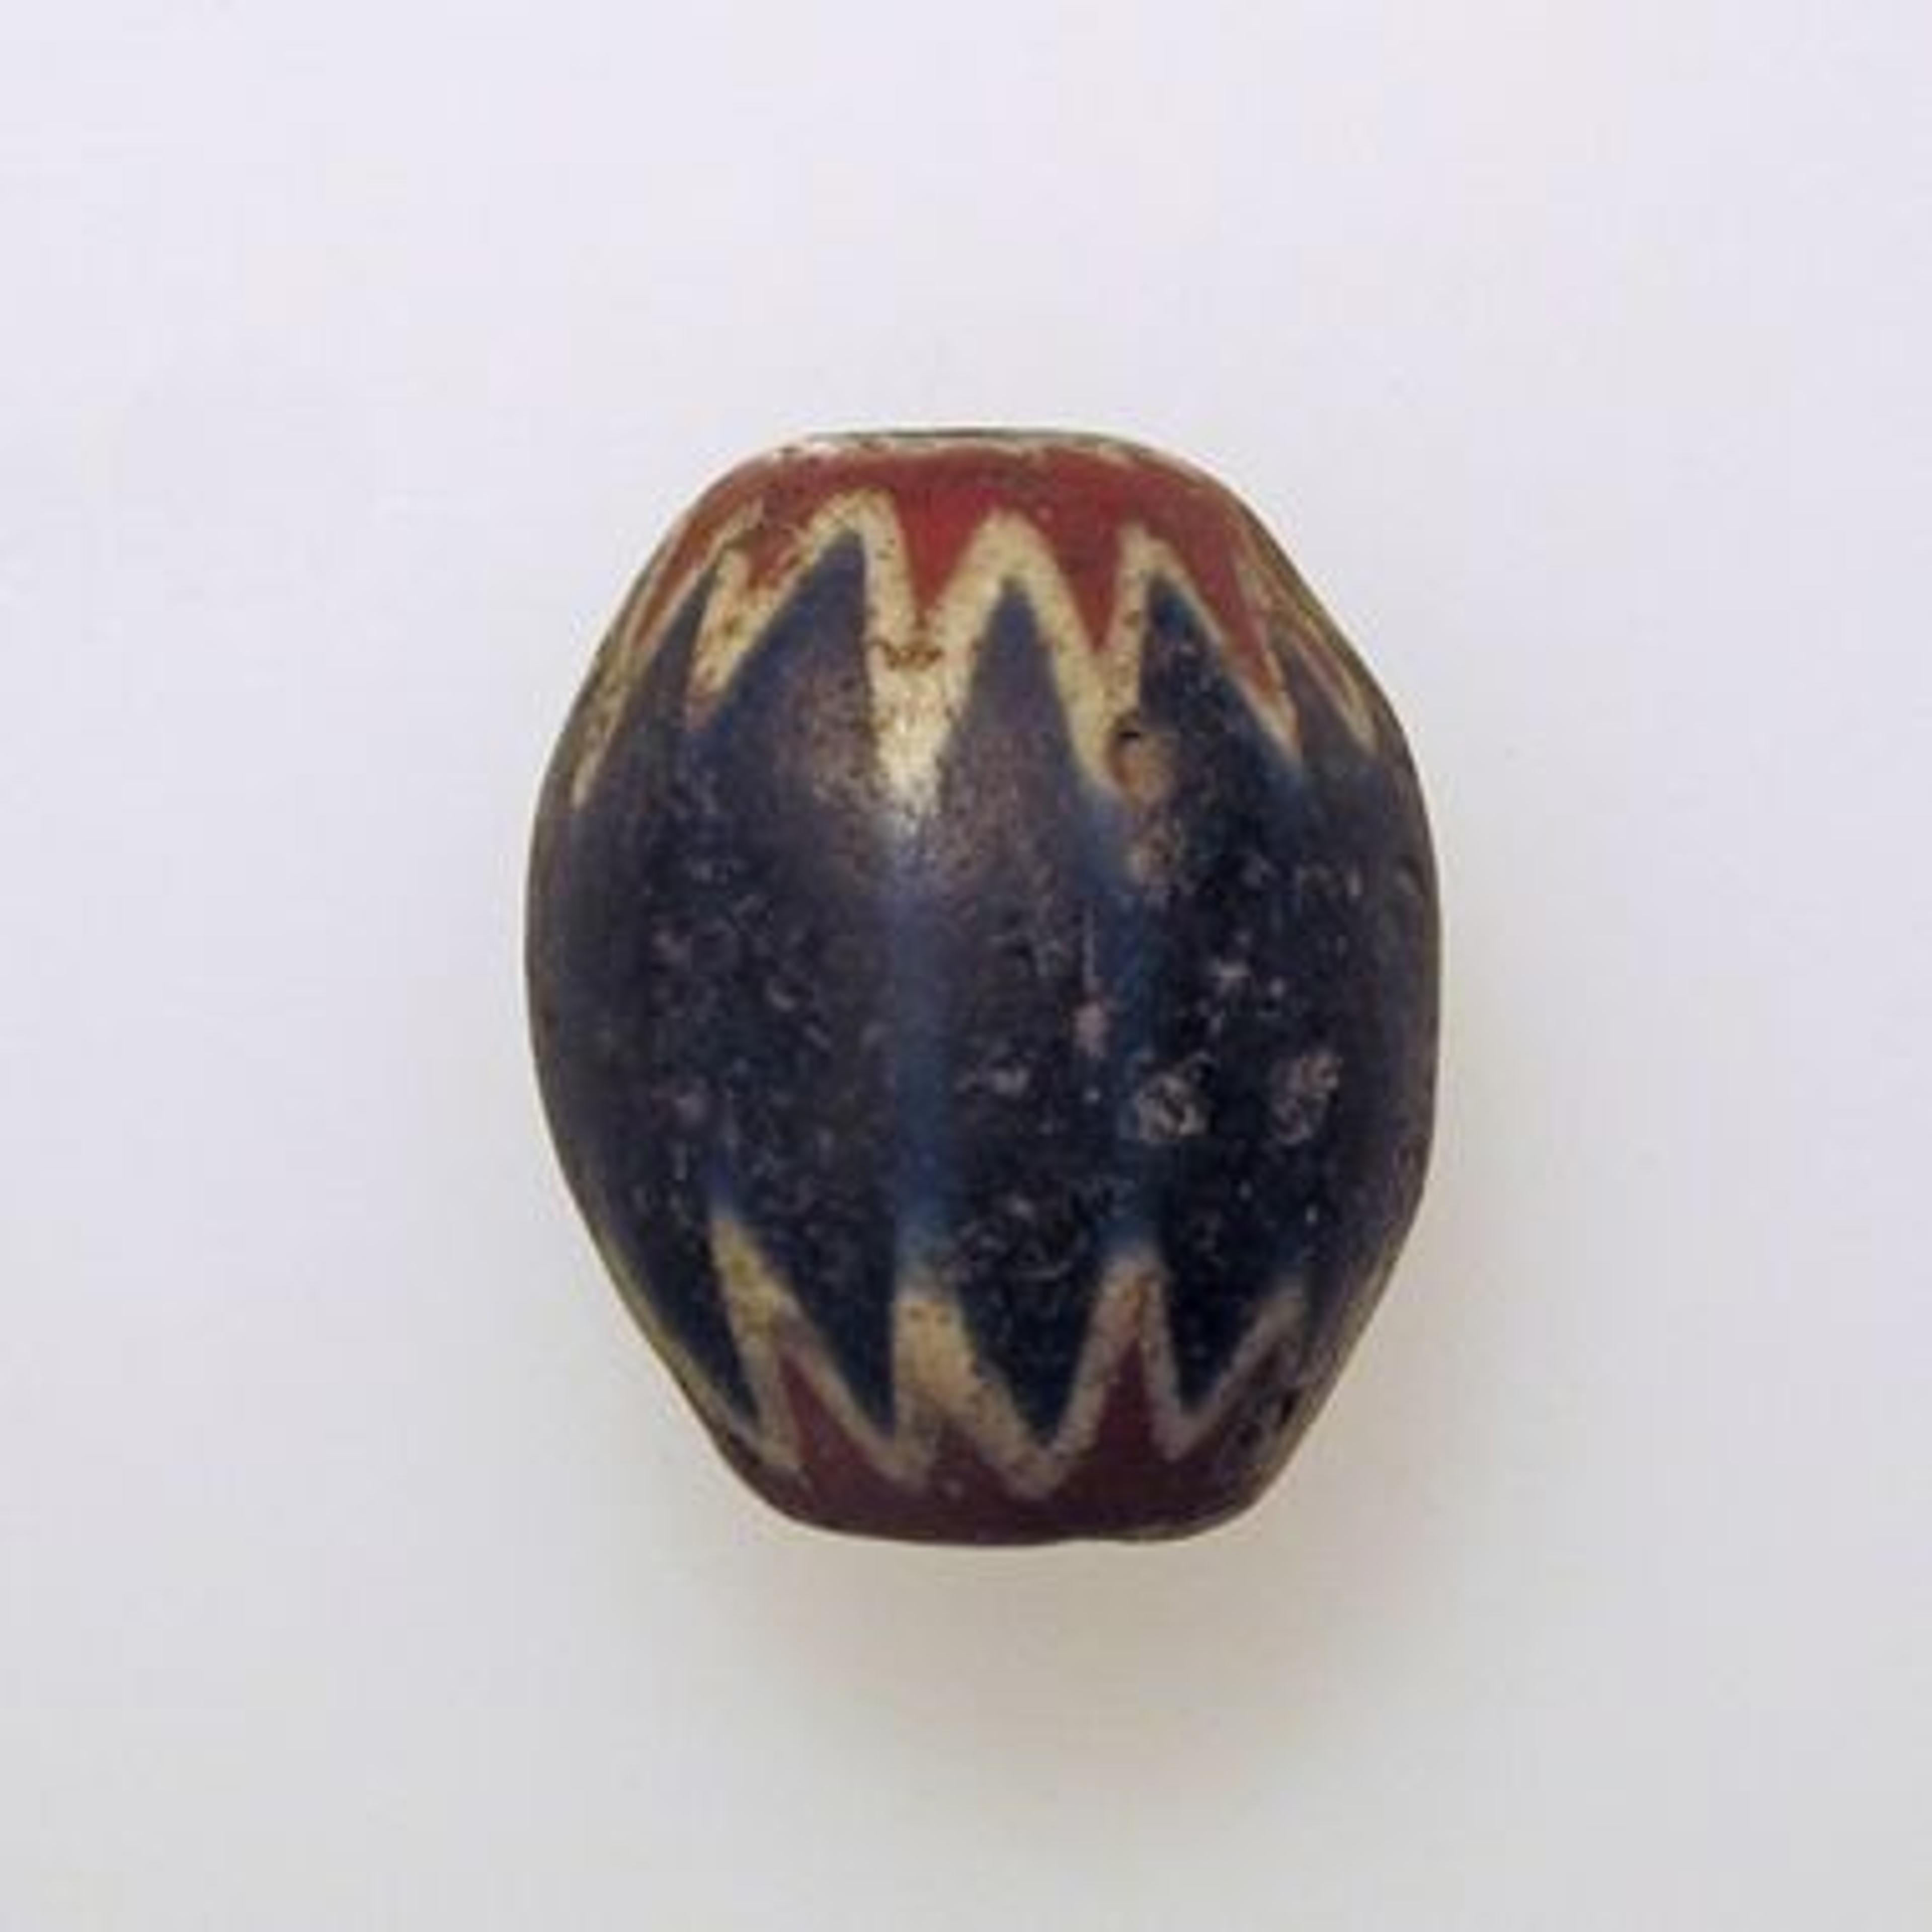 A blue, red, and gold glass bead with a chevron design